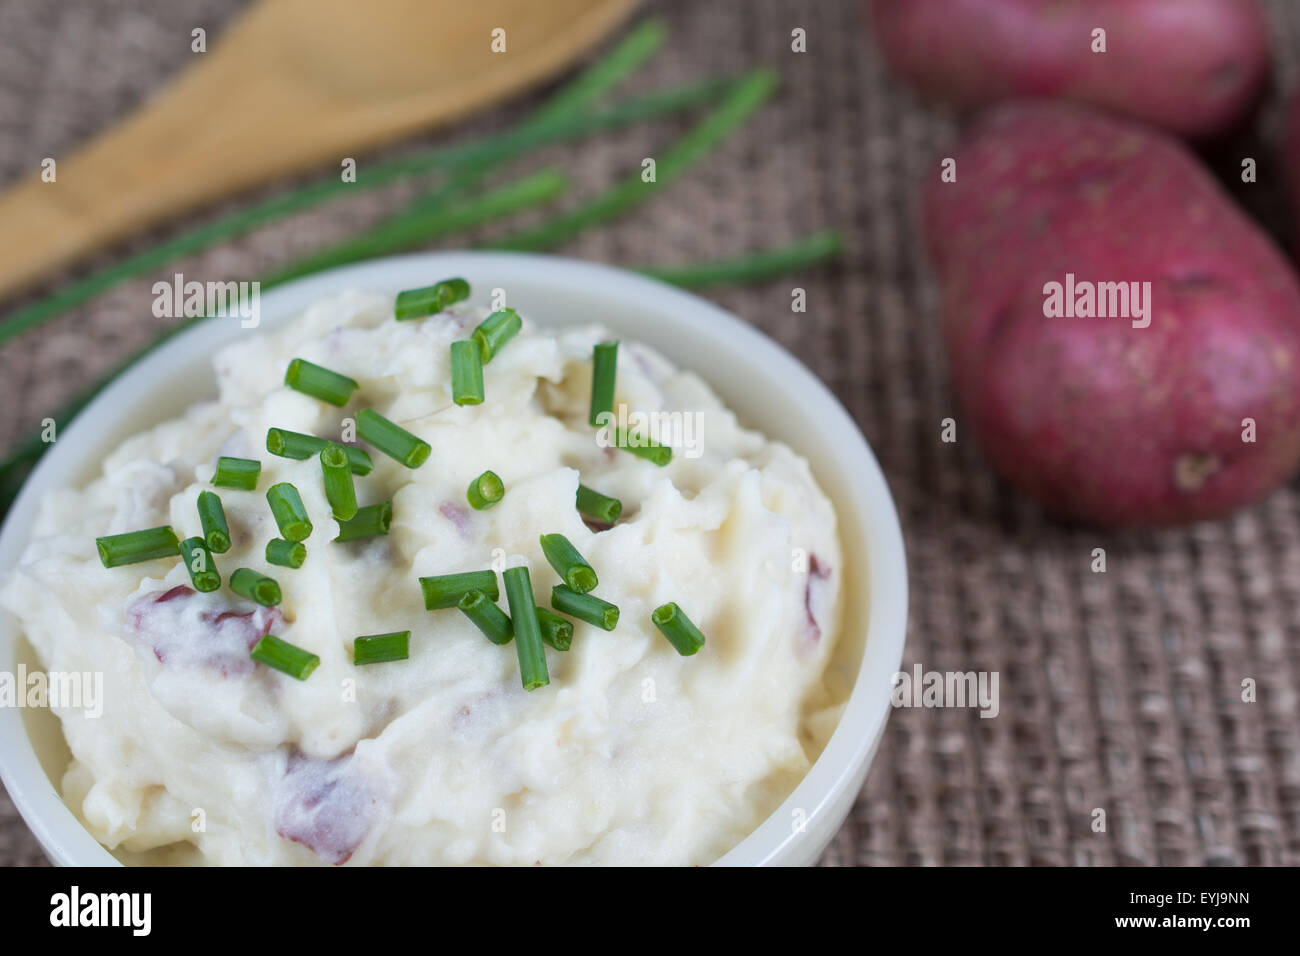 Mashed potatoes and chives Stock Photo